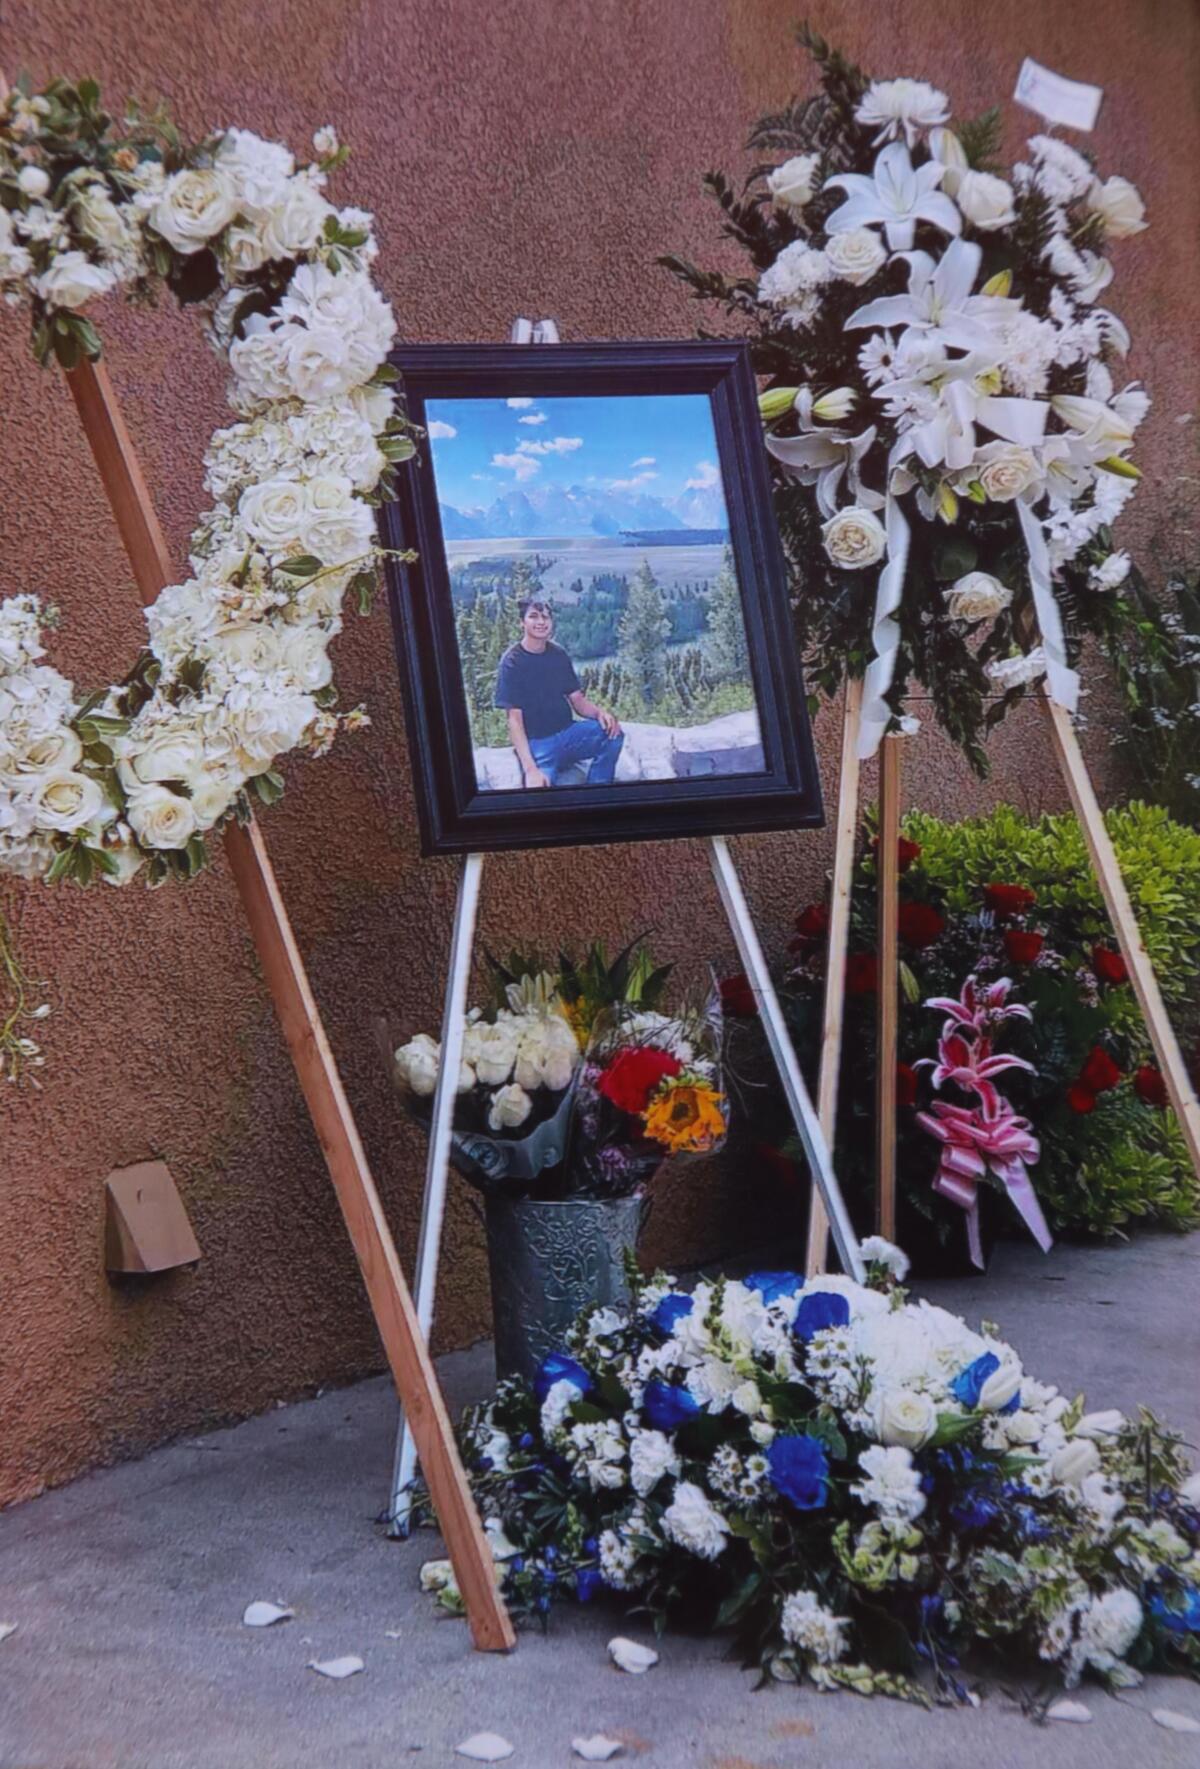 A memorial for Bryan Diaz appears in a photograph in a family album.